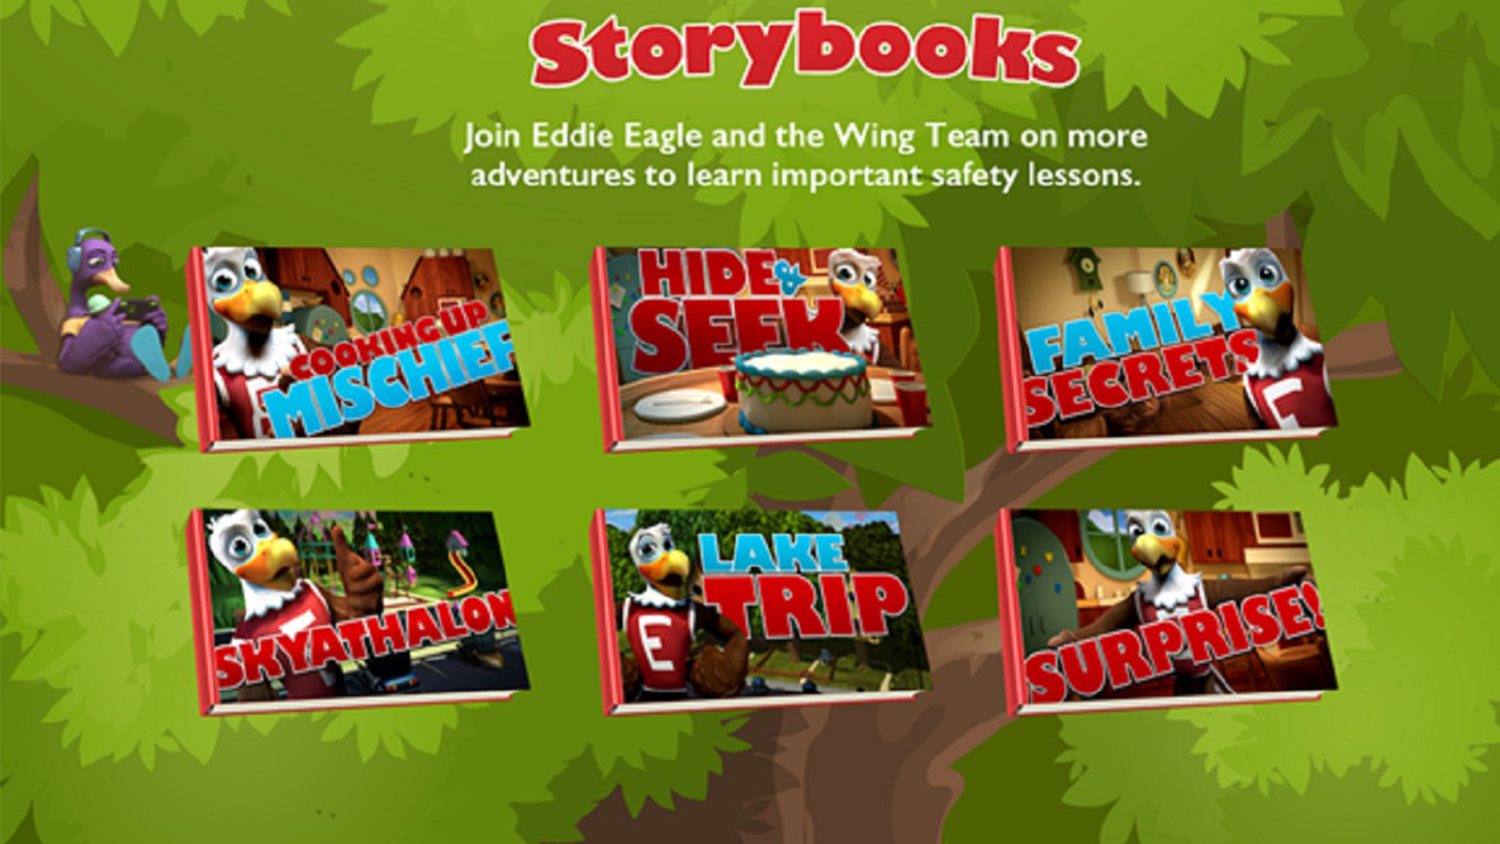 8 Excuse Busters: Watch and Share the Eddie Eagle Program